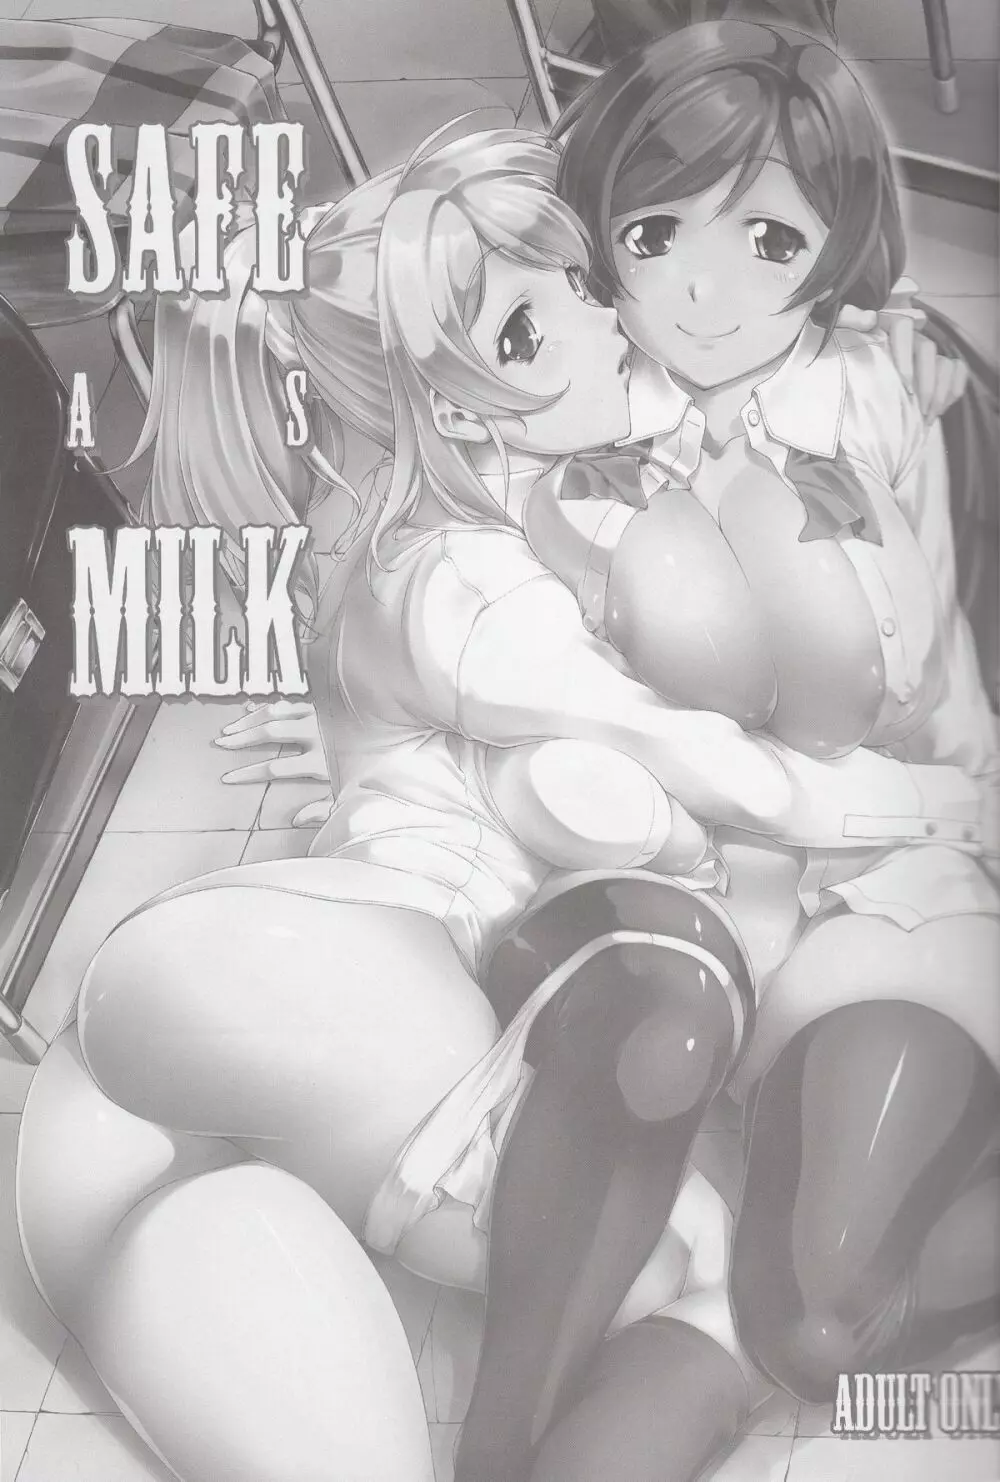 SAFE as MILK Page.2